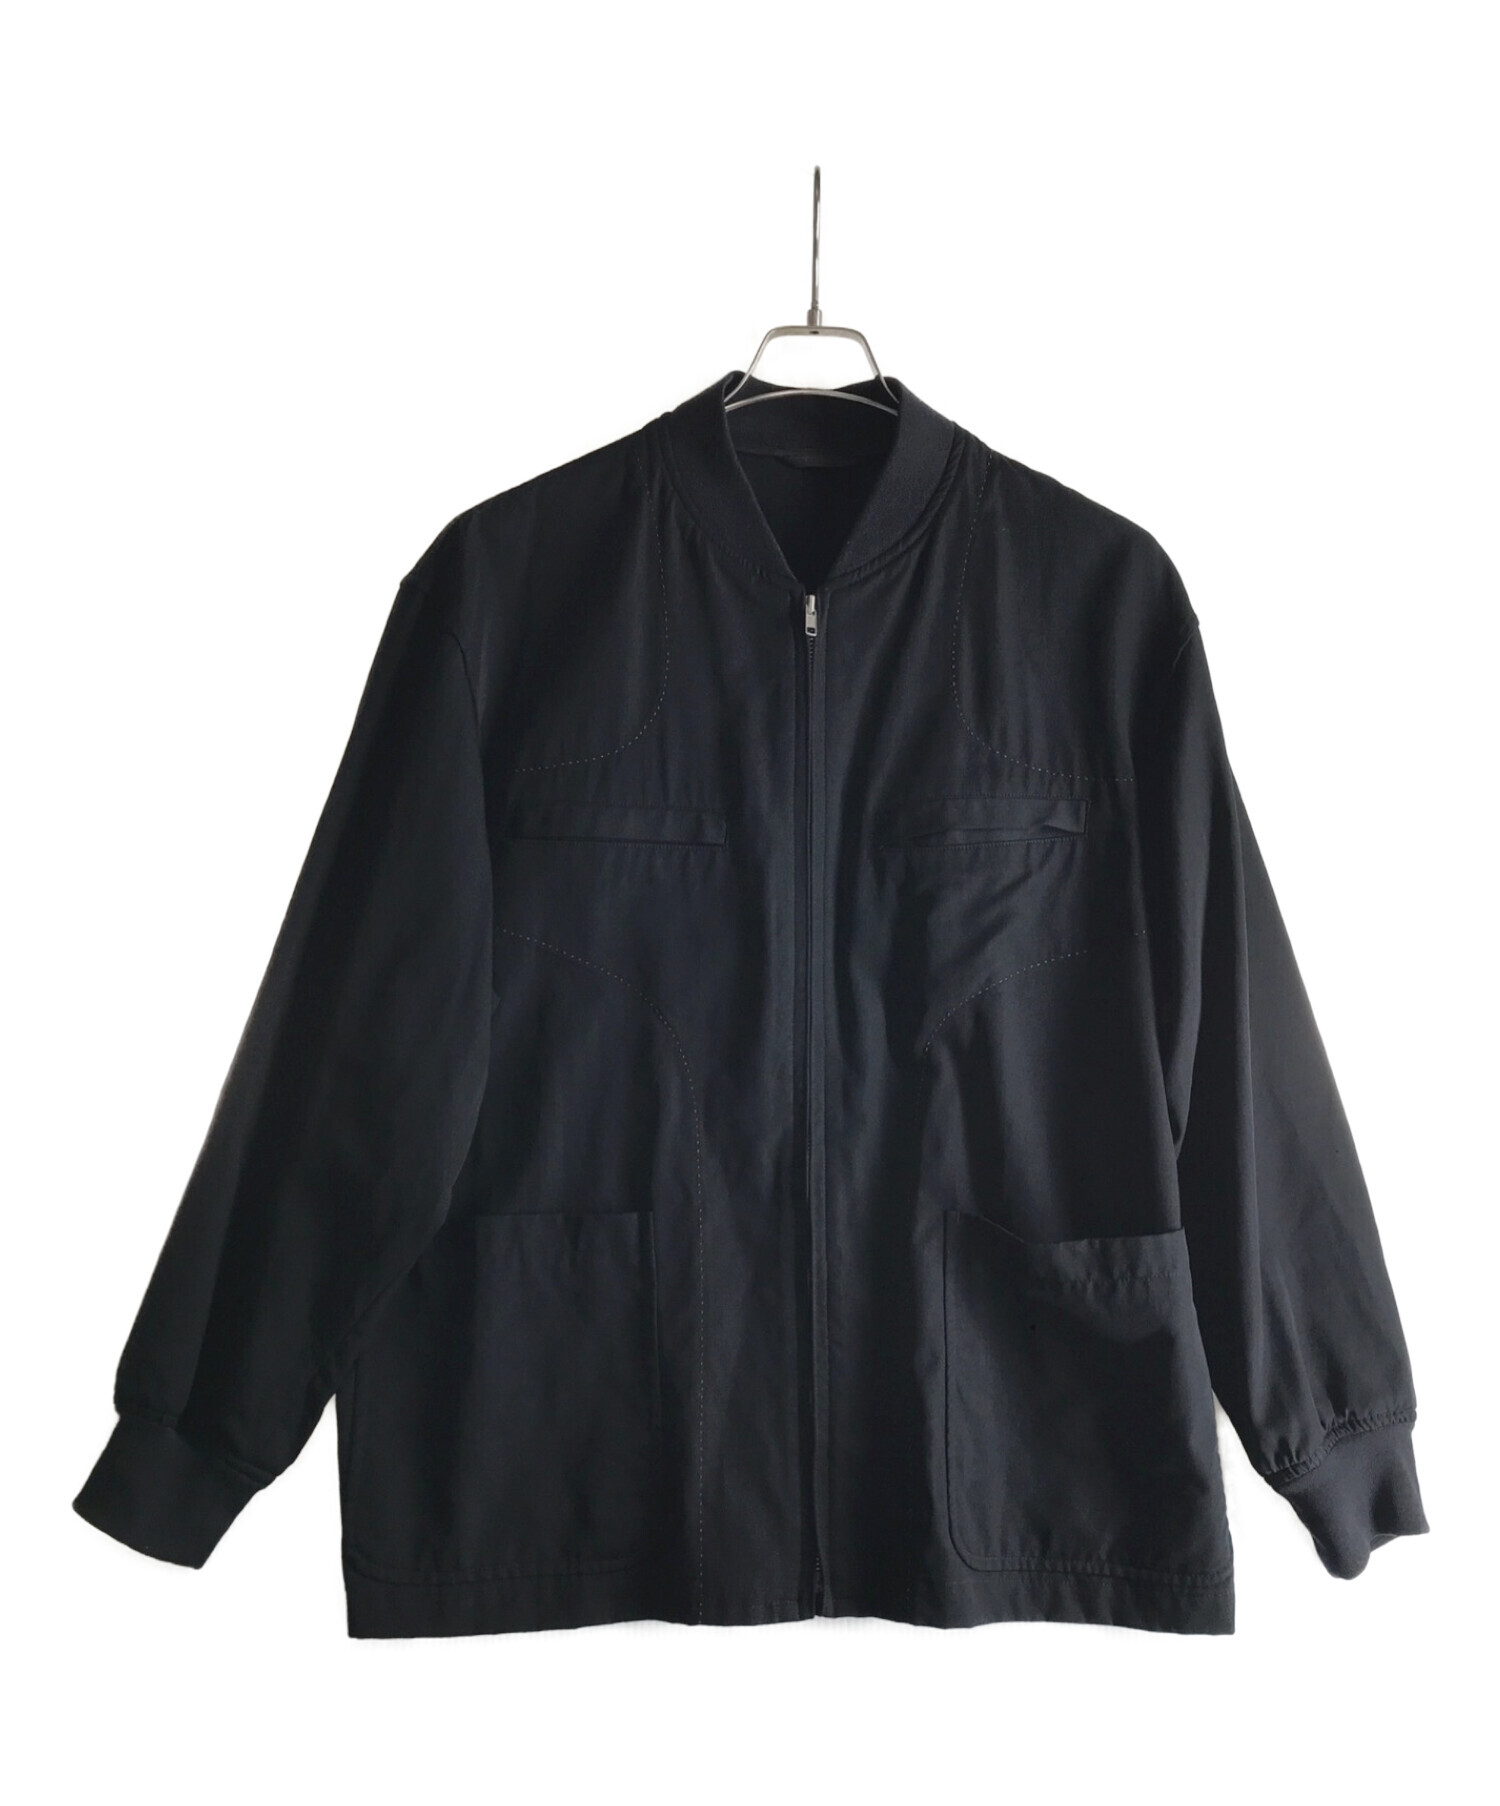 COMME des GARCONS HOMME ブルゾン（その他） M 黒